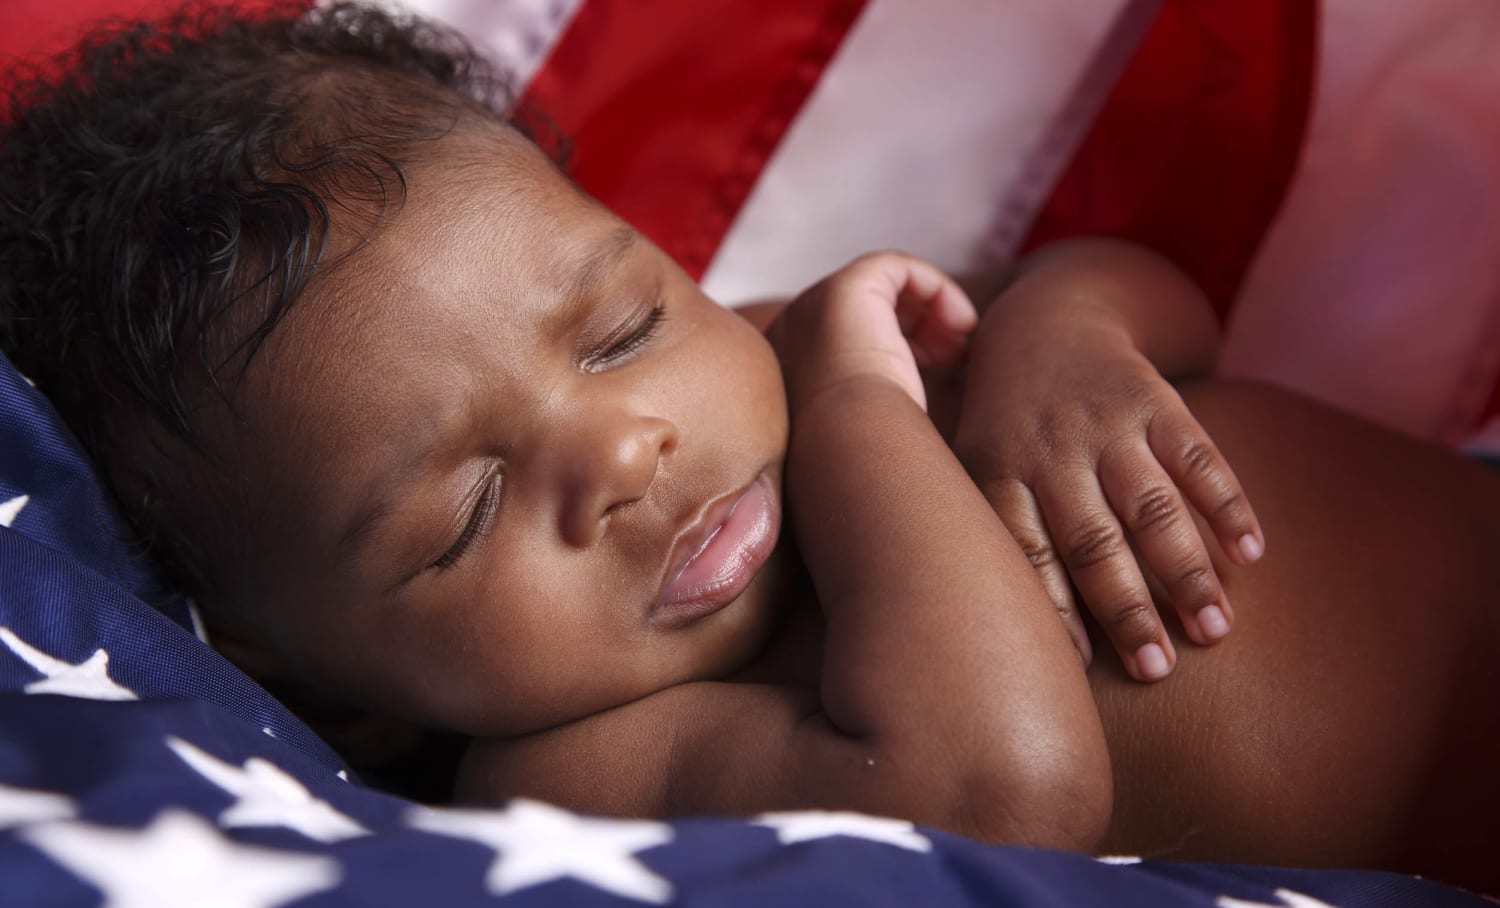 90 patriotic baby names for boys and girls: Let freedom ring!